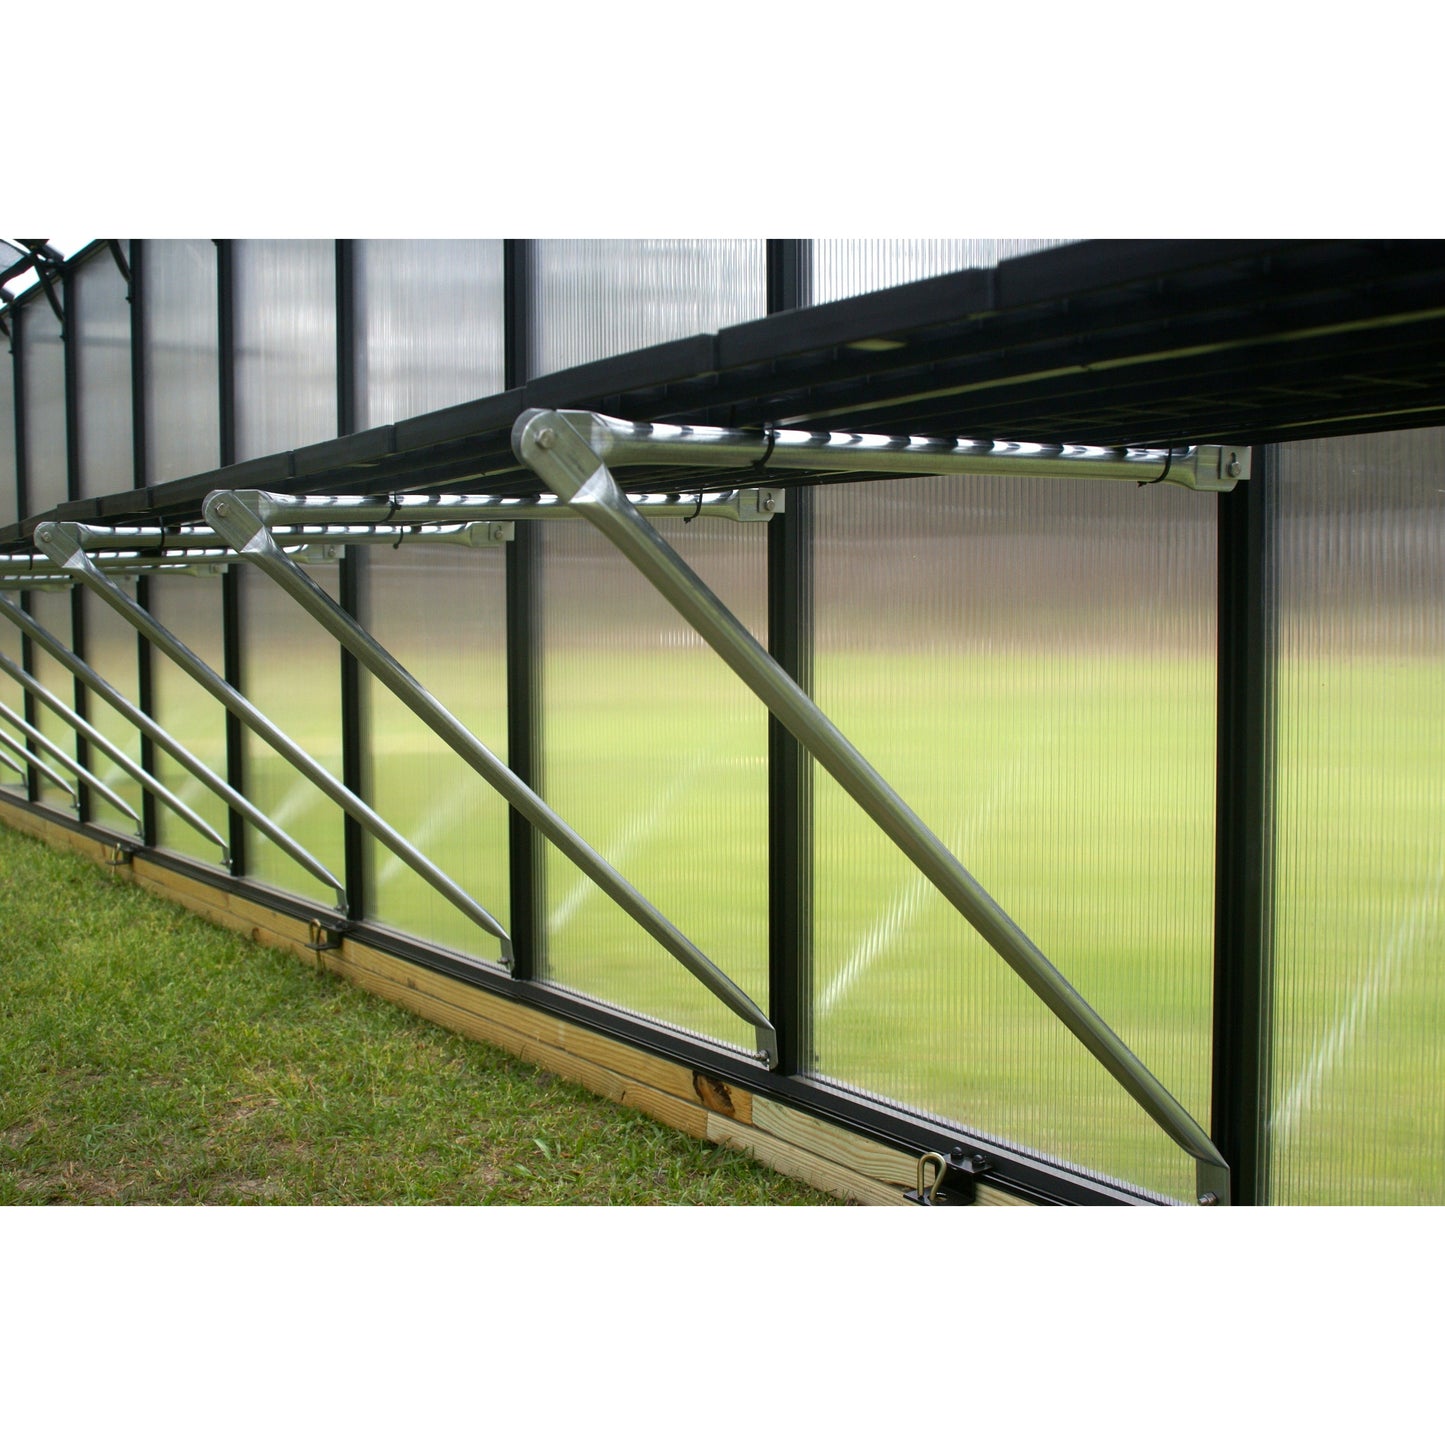 Mont Growers Edition Greenhouse 8FTx 20FT - Black Finish MONT-20-BK-GROWERS